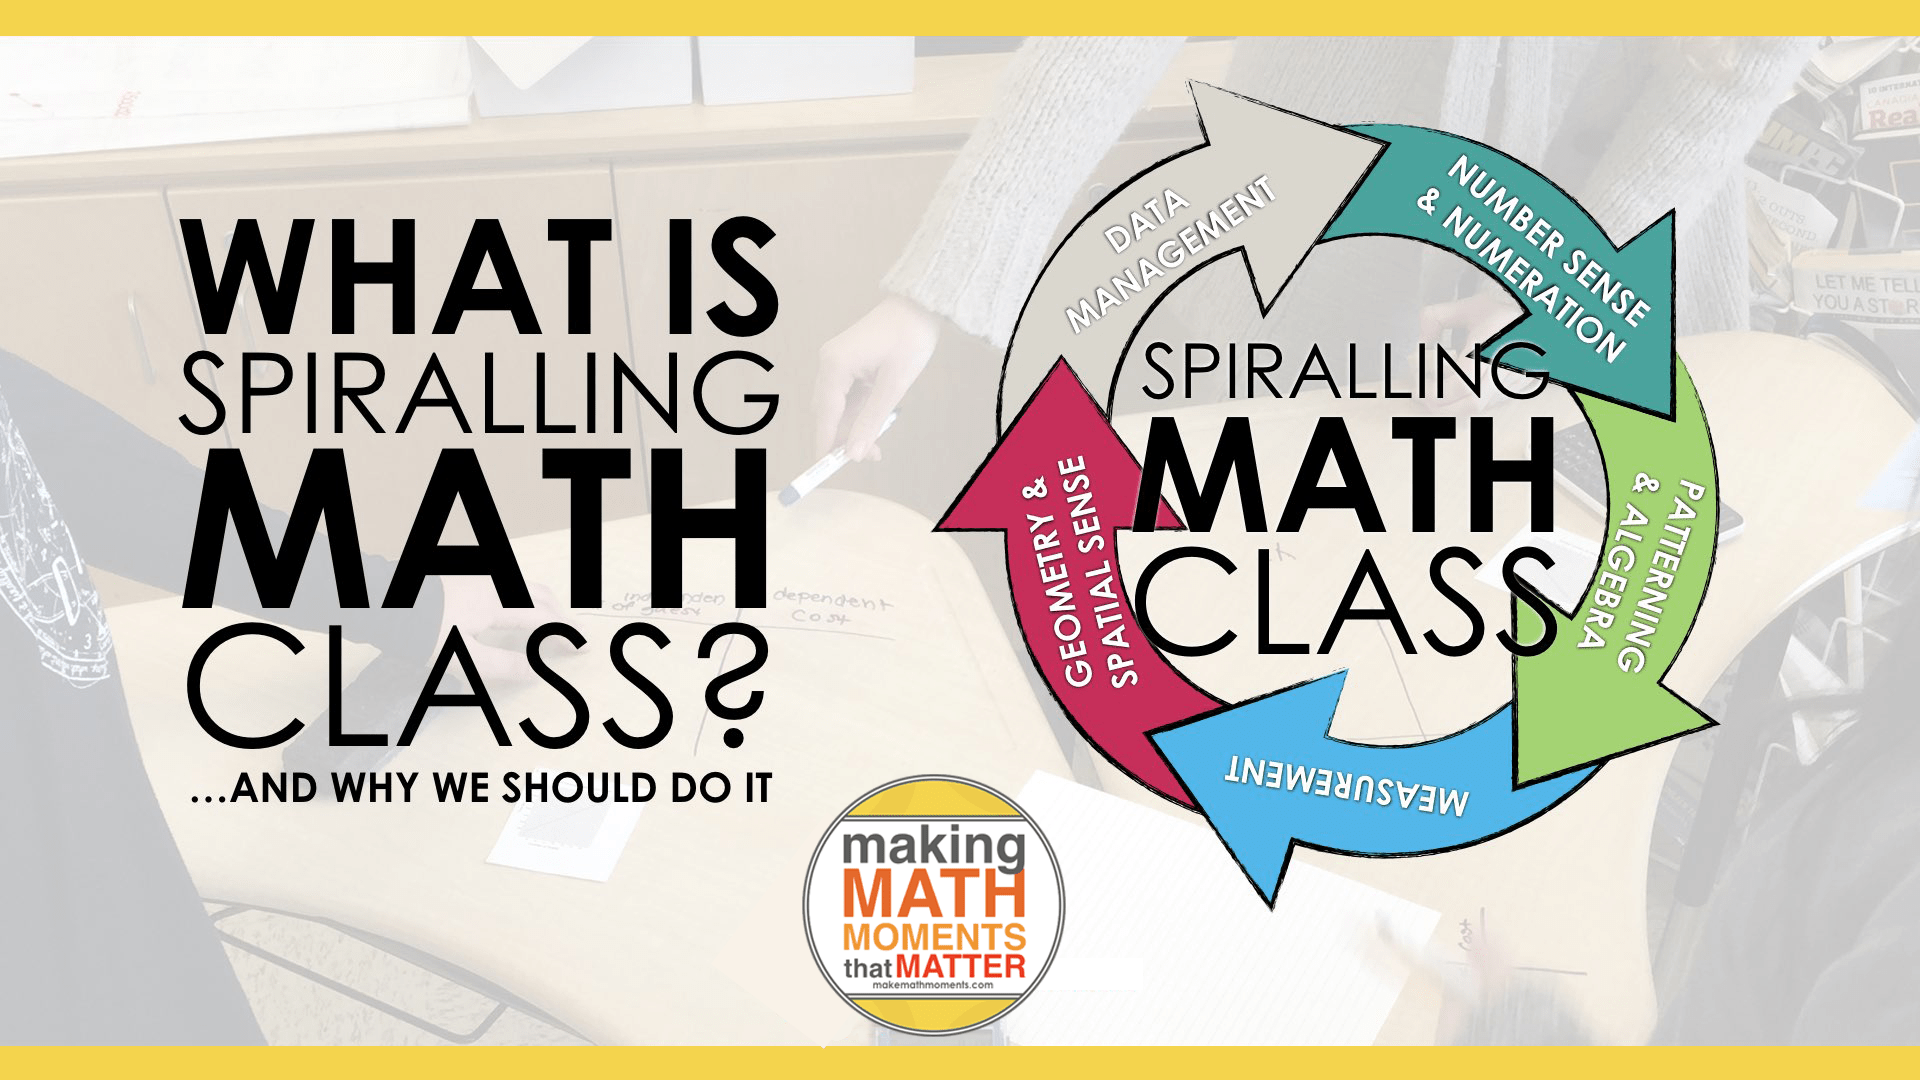 Spiralling Your Math Curriculum - What Is Spiralling Math Class and Why We Should Do It